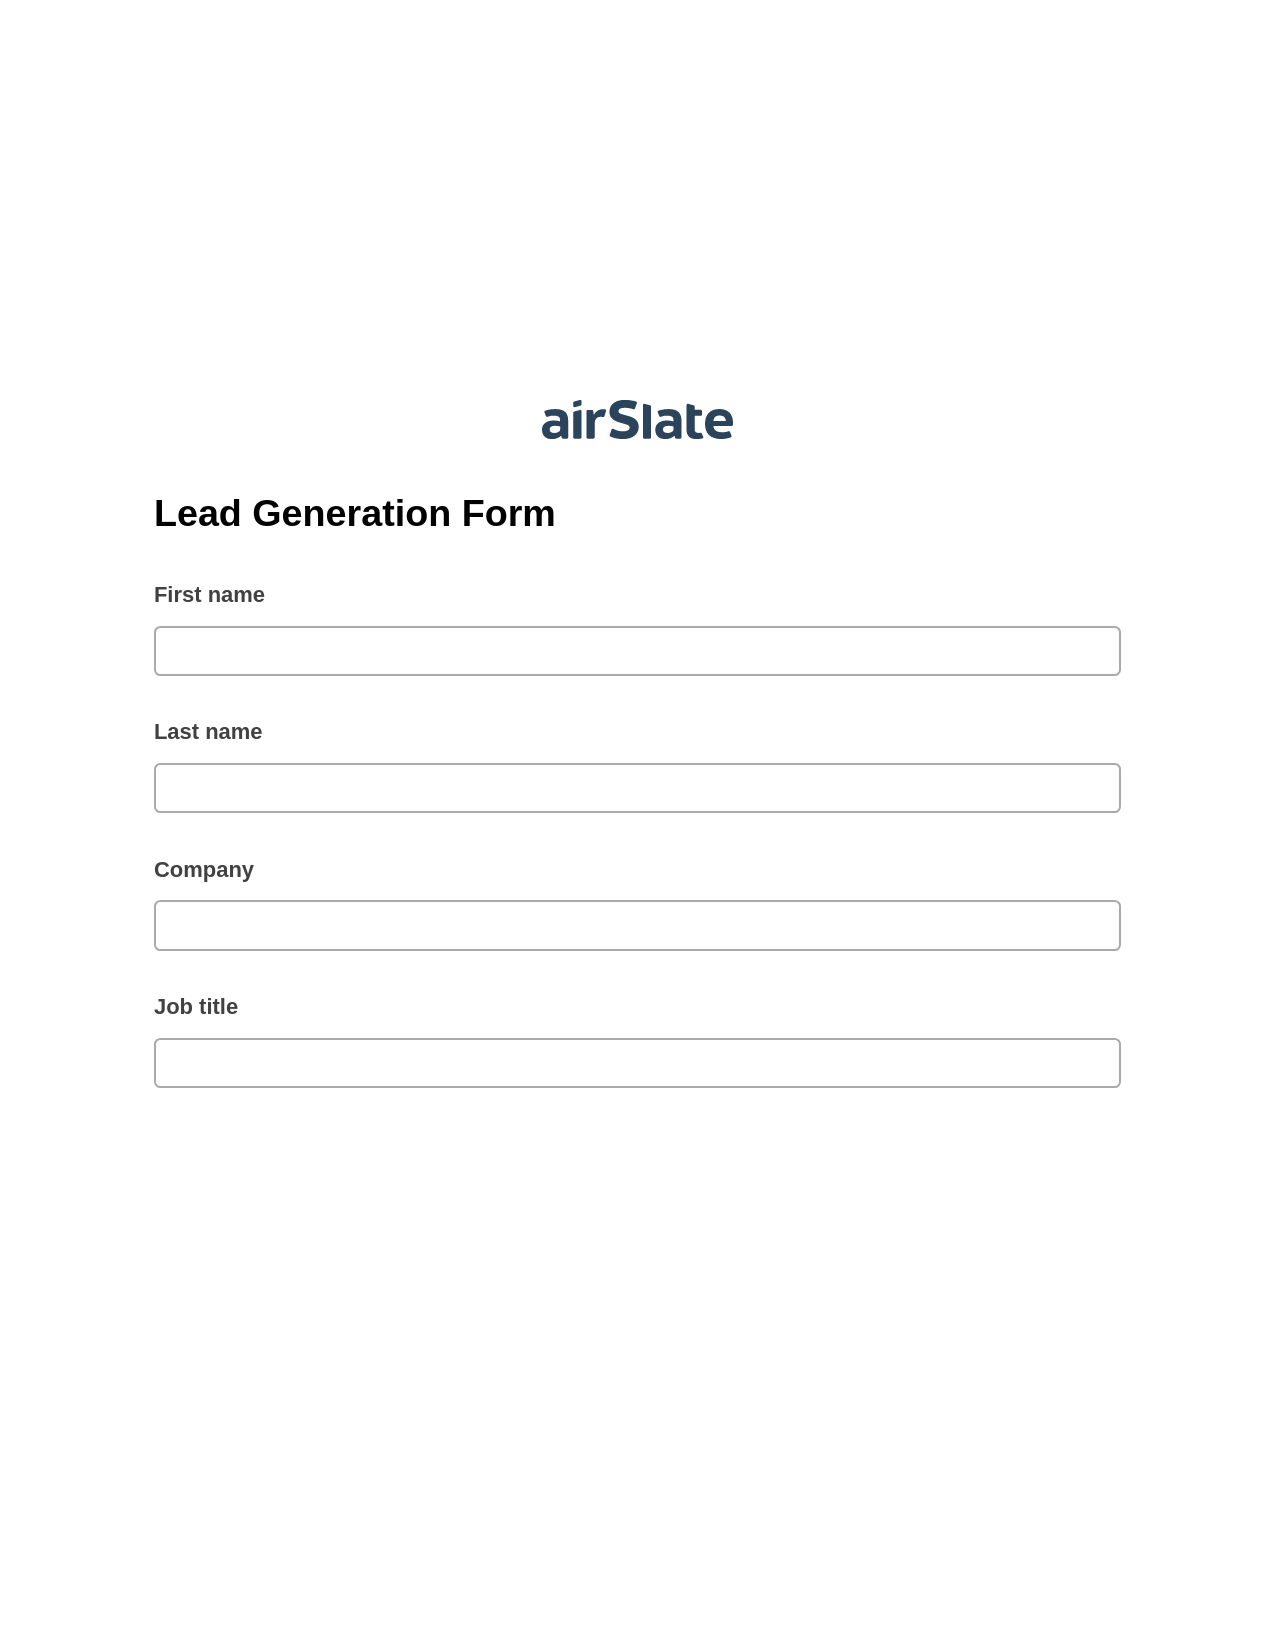 Multirole Lead Generation Form Pre-fill from Google Sheets Bot, Send a Slate to Salesforce Contact Bot, Export to Google Sheet Bot